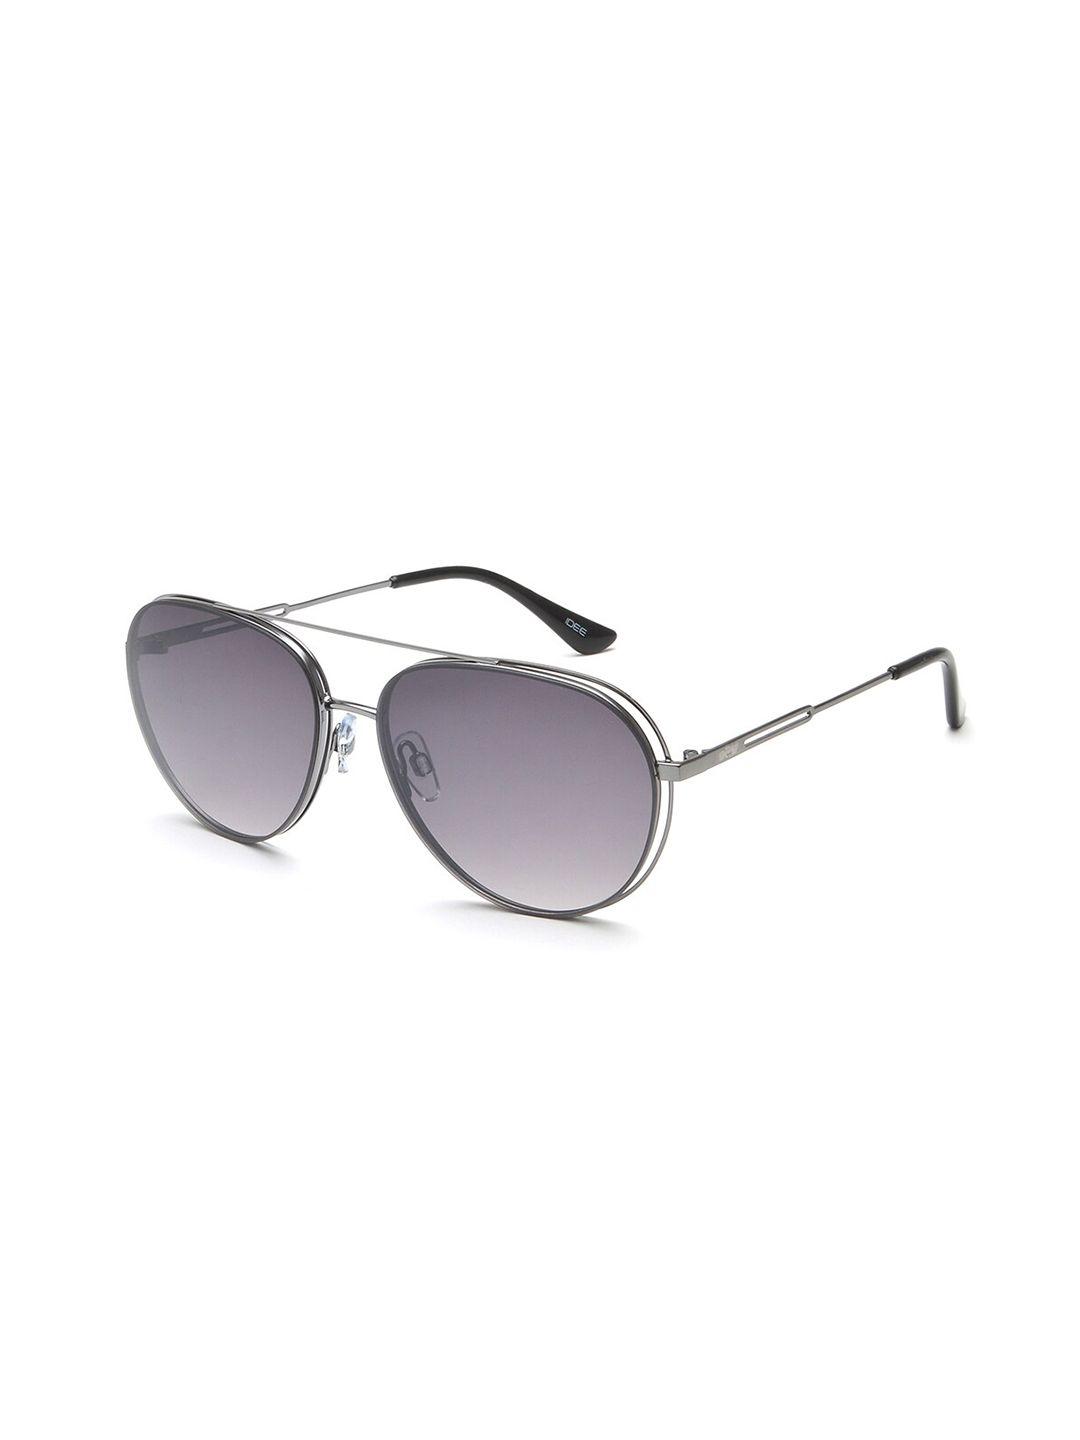 IDEE Men Grey Lens & Silver-Toned Aviator Sunglasses with UV Protected Lens